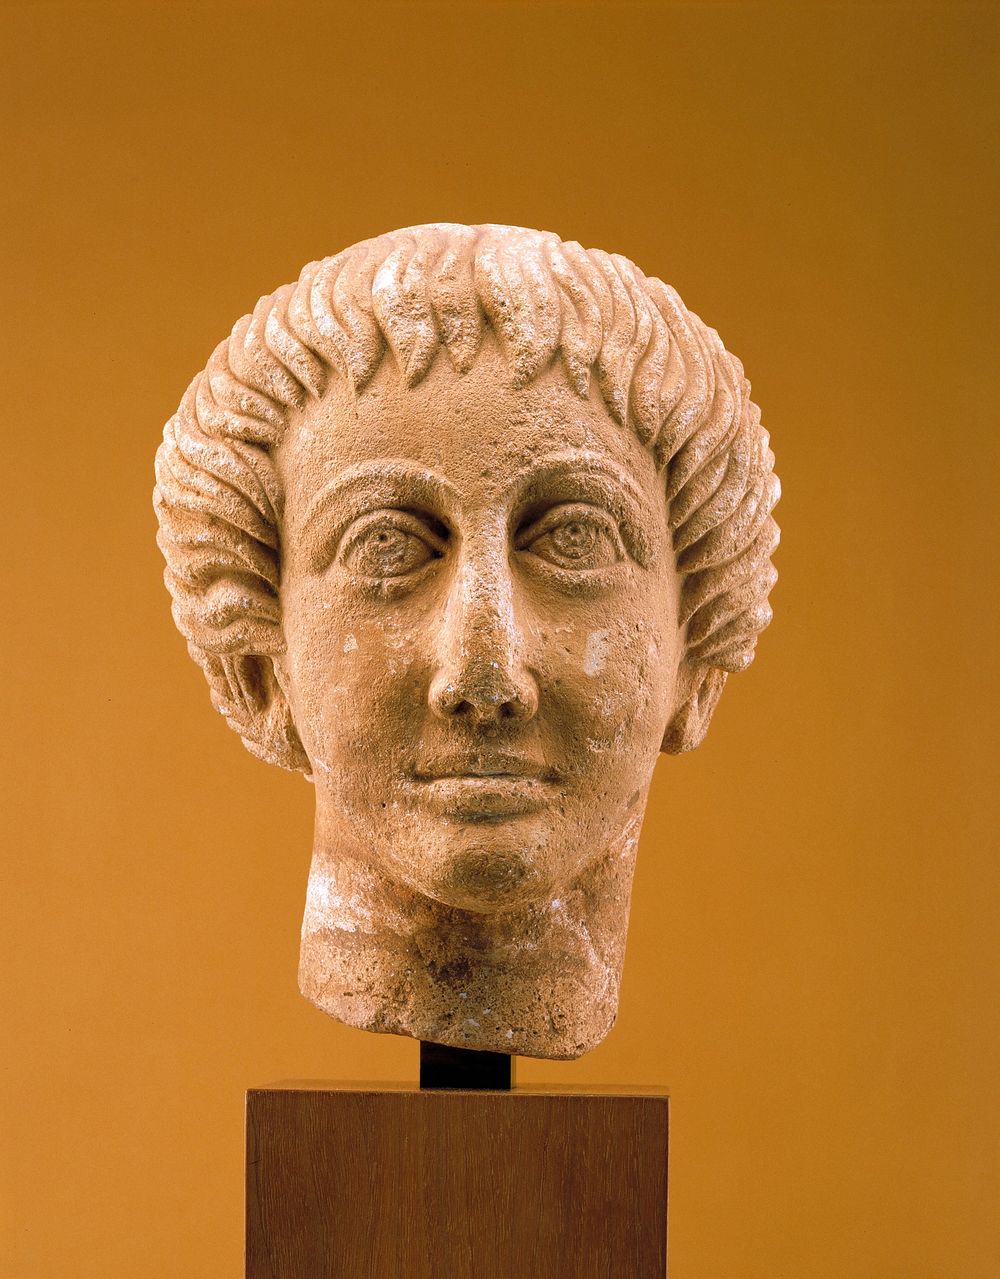 fine example of late Roman/early Byzantine provincial portraiture. Original from the Minneapolis Institute of Art.